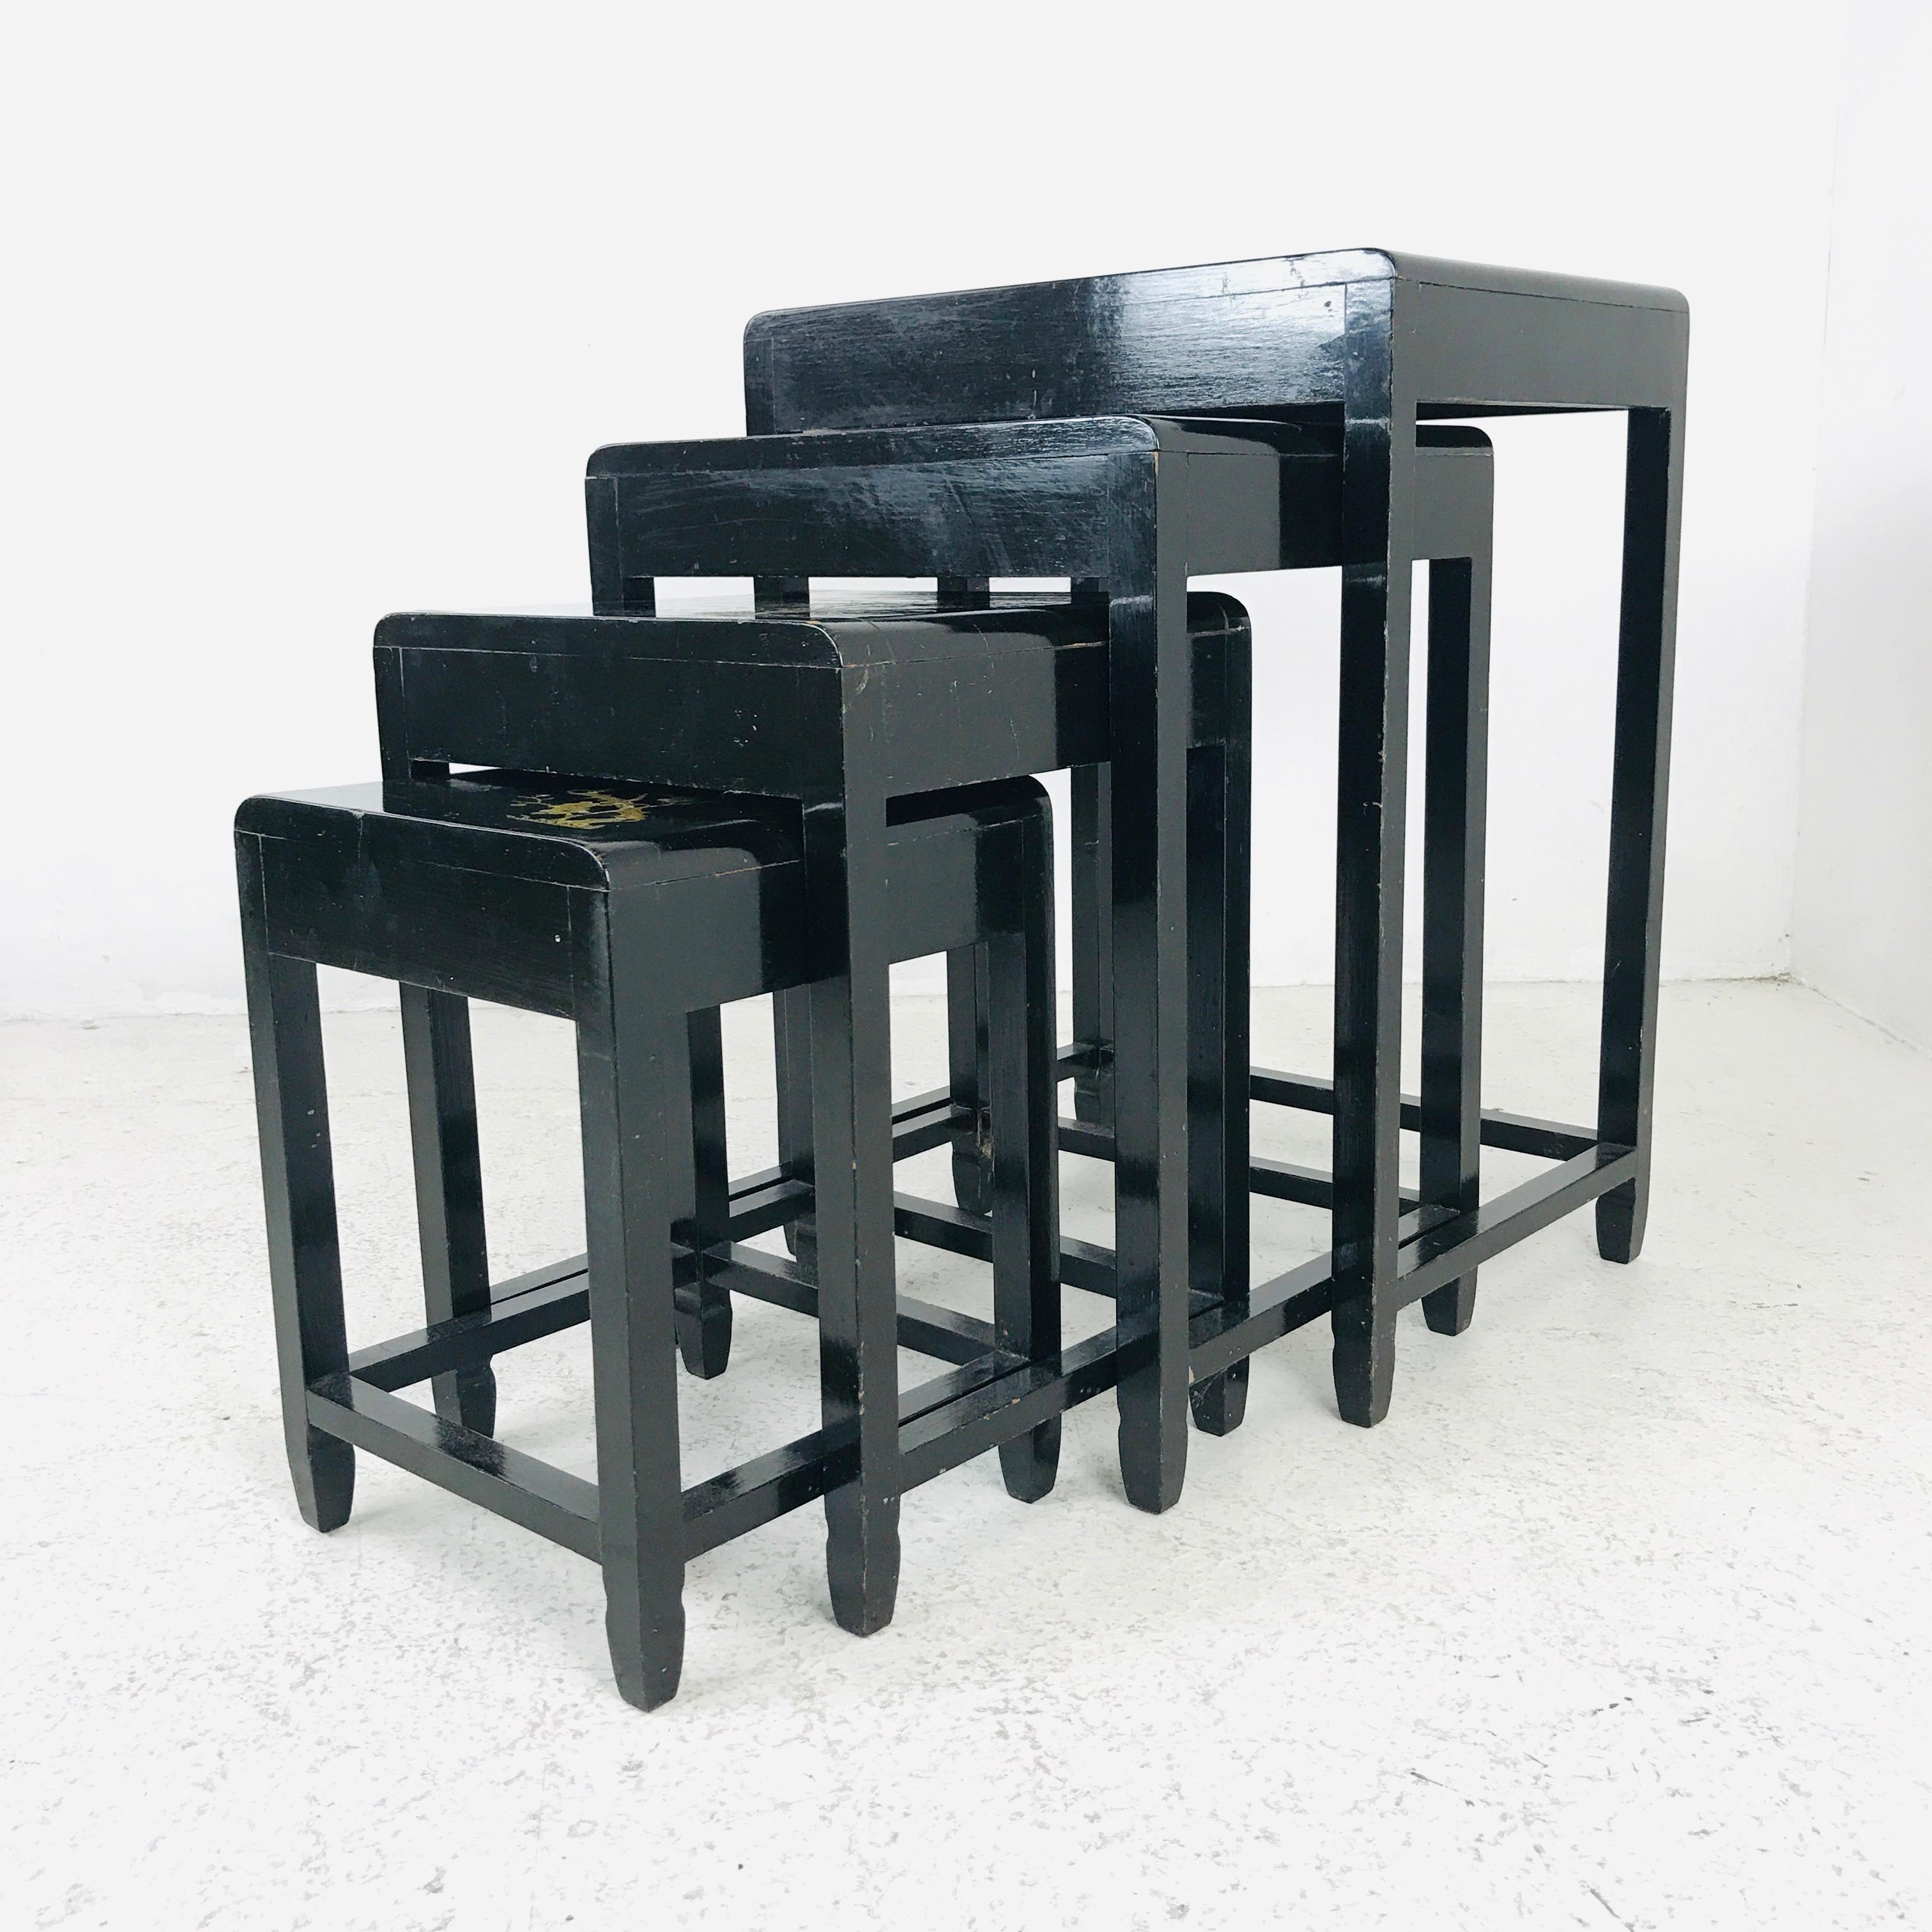 Set of 4 vintage Asian nesting tables with black lacquer and gold inlay.
Measurements are: Large: 18.5